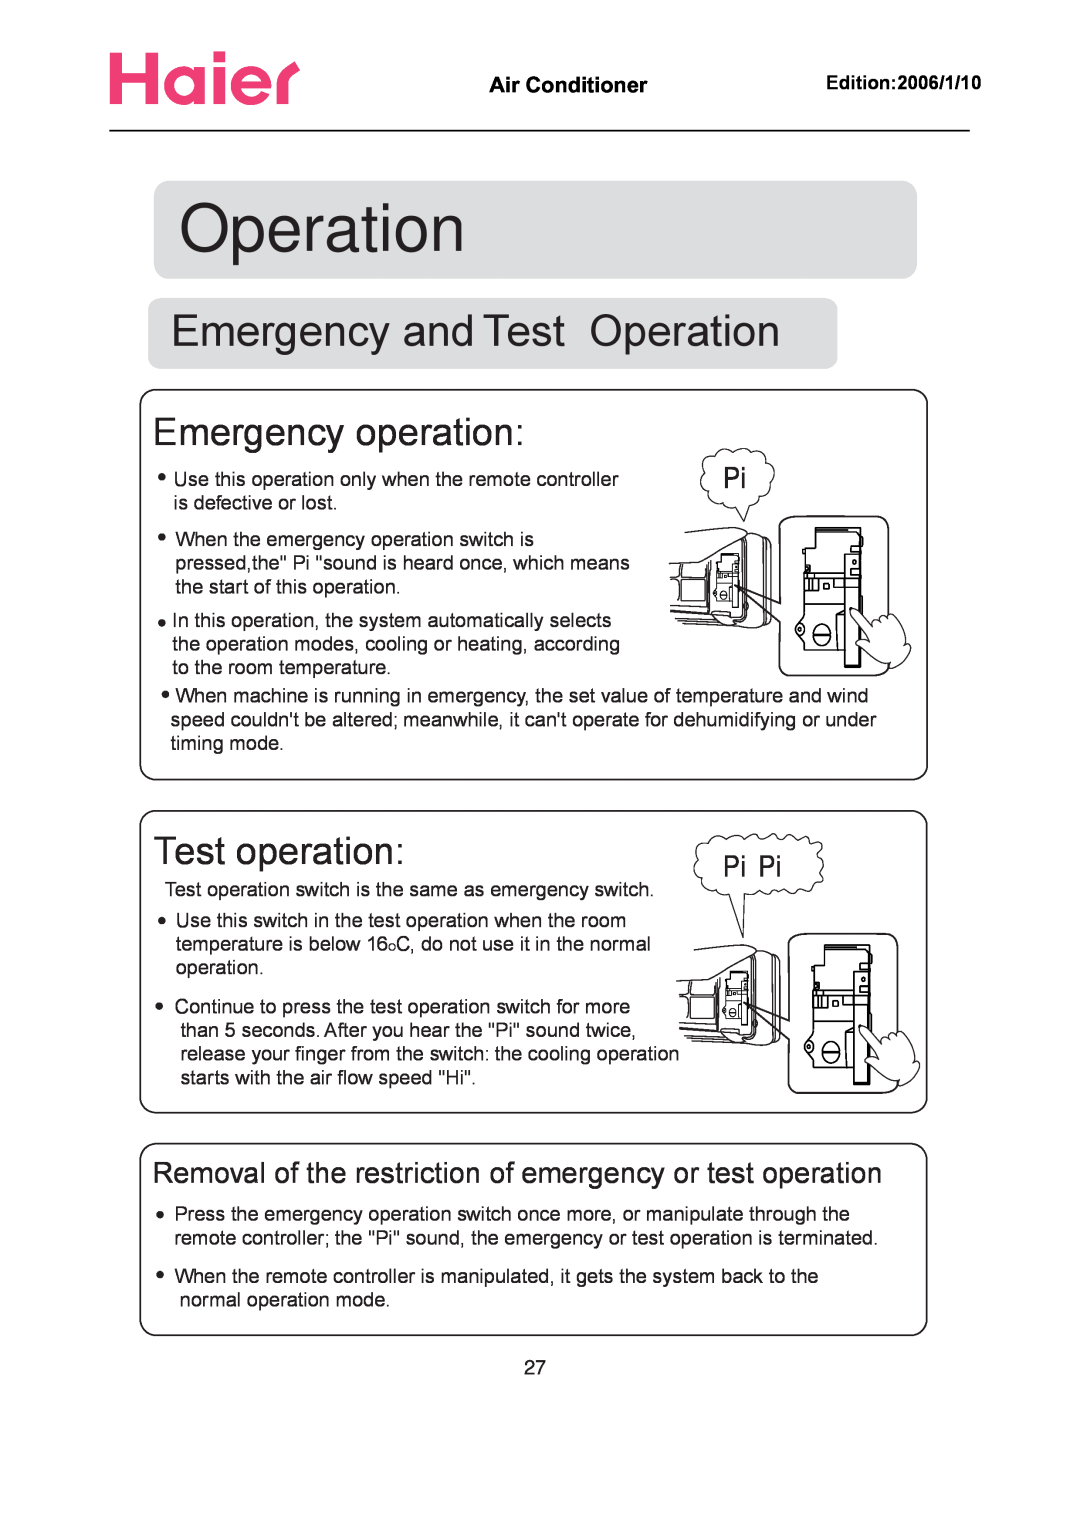 Haier Compact Air Conditioner manual Emergency and Test Operation, Emergency operation, Test operation 